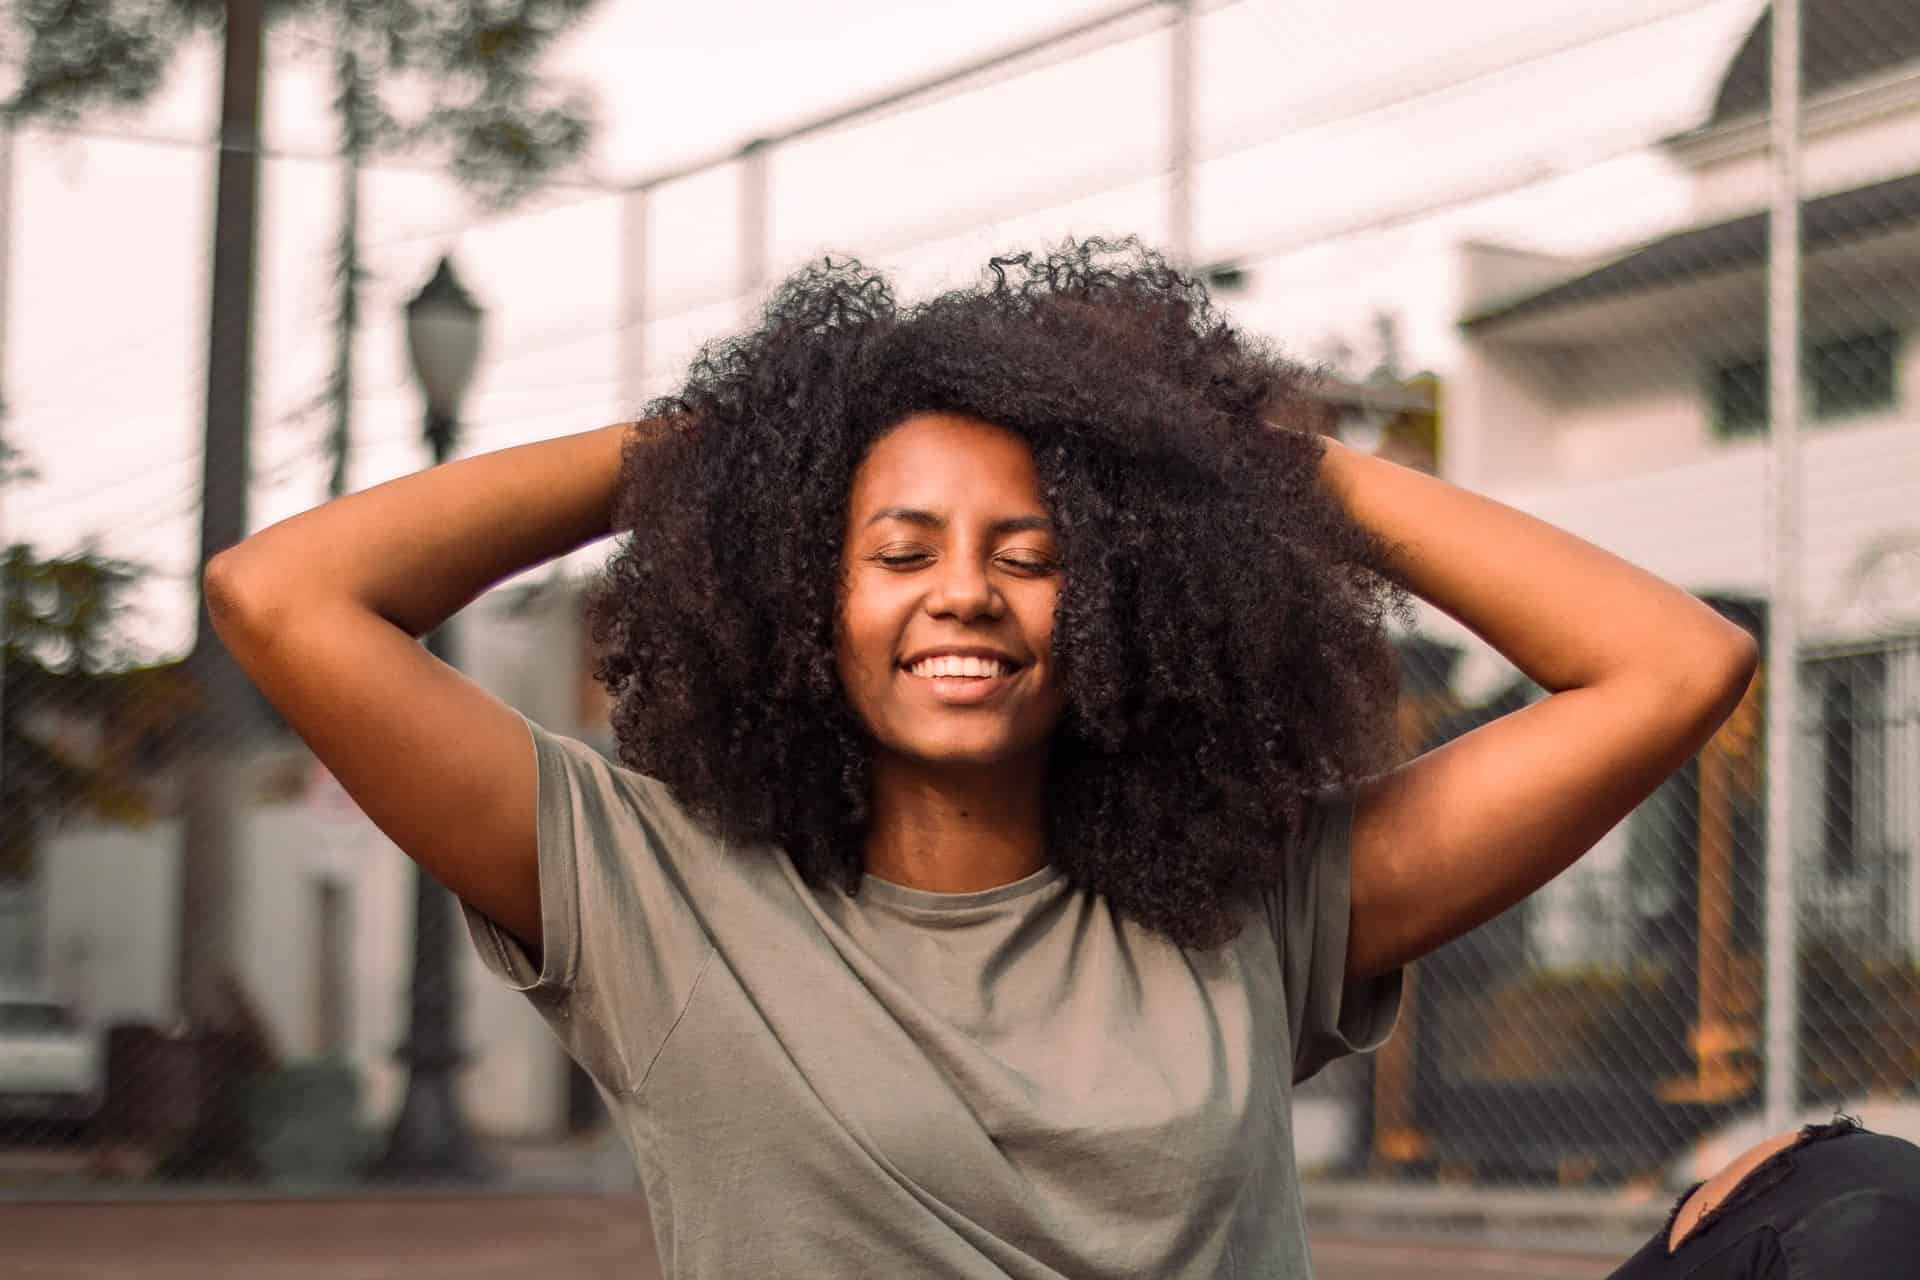 young woman laughing with raised arms